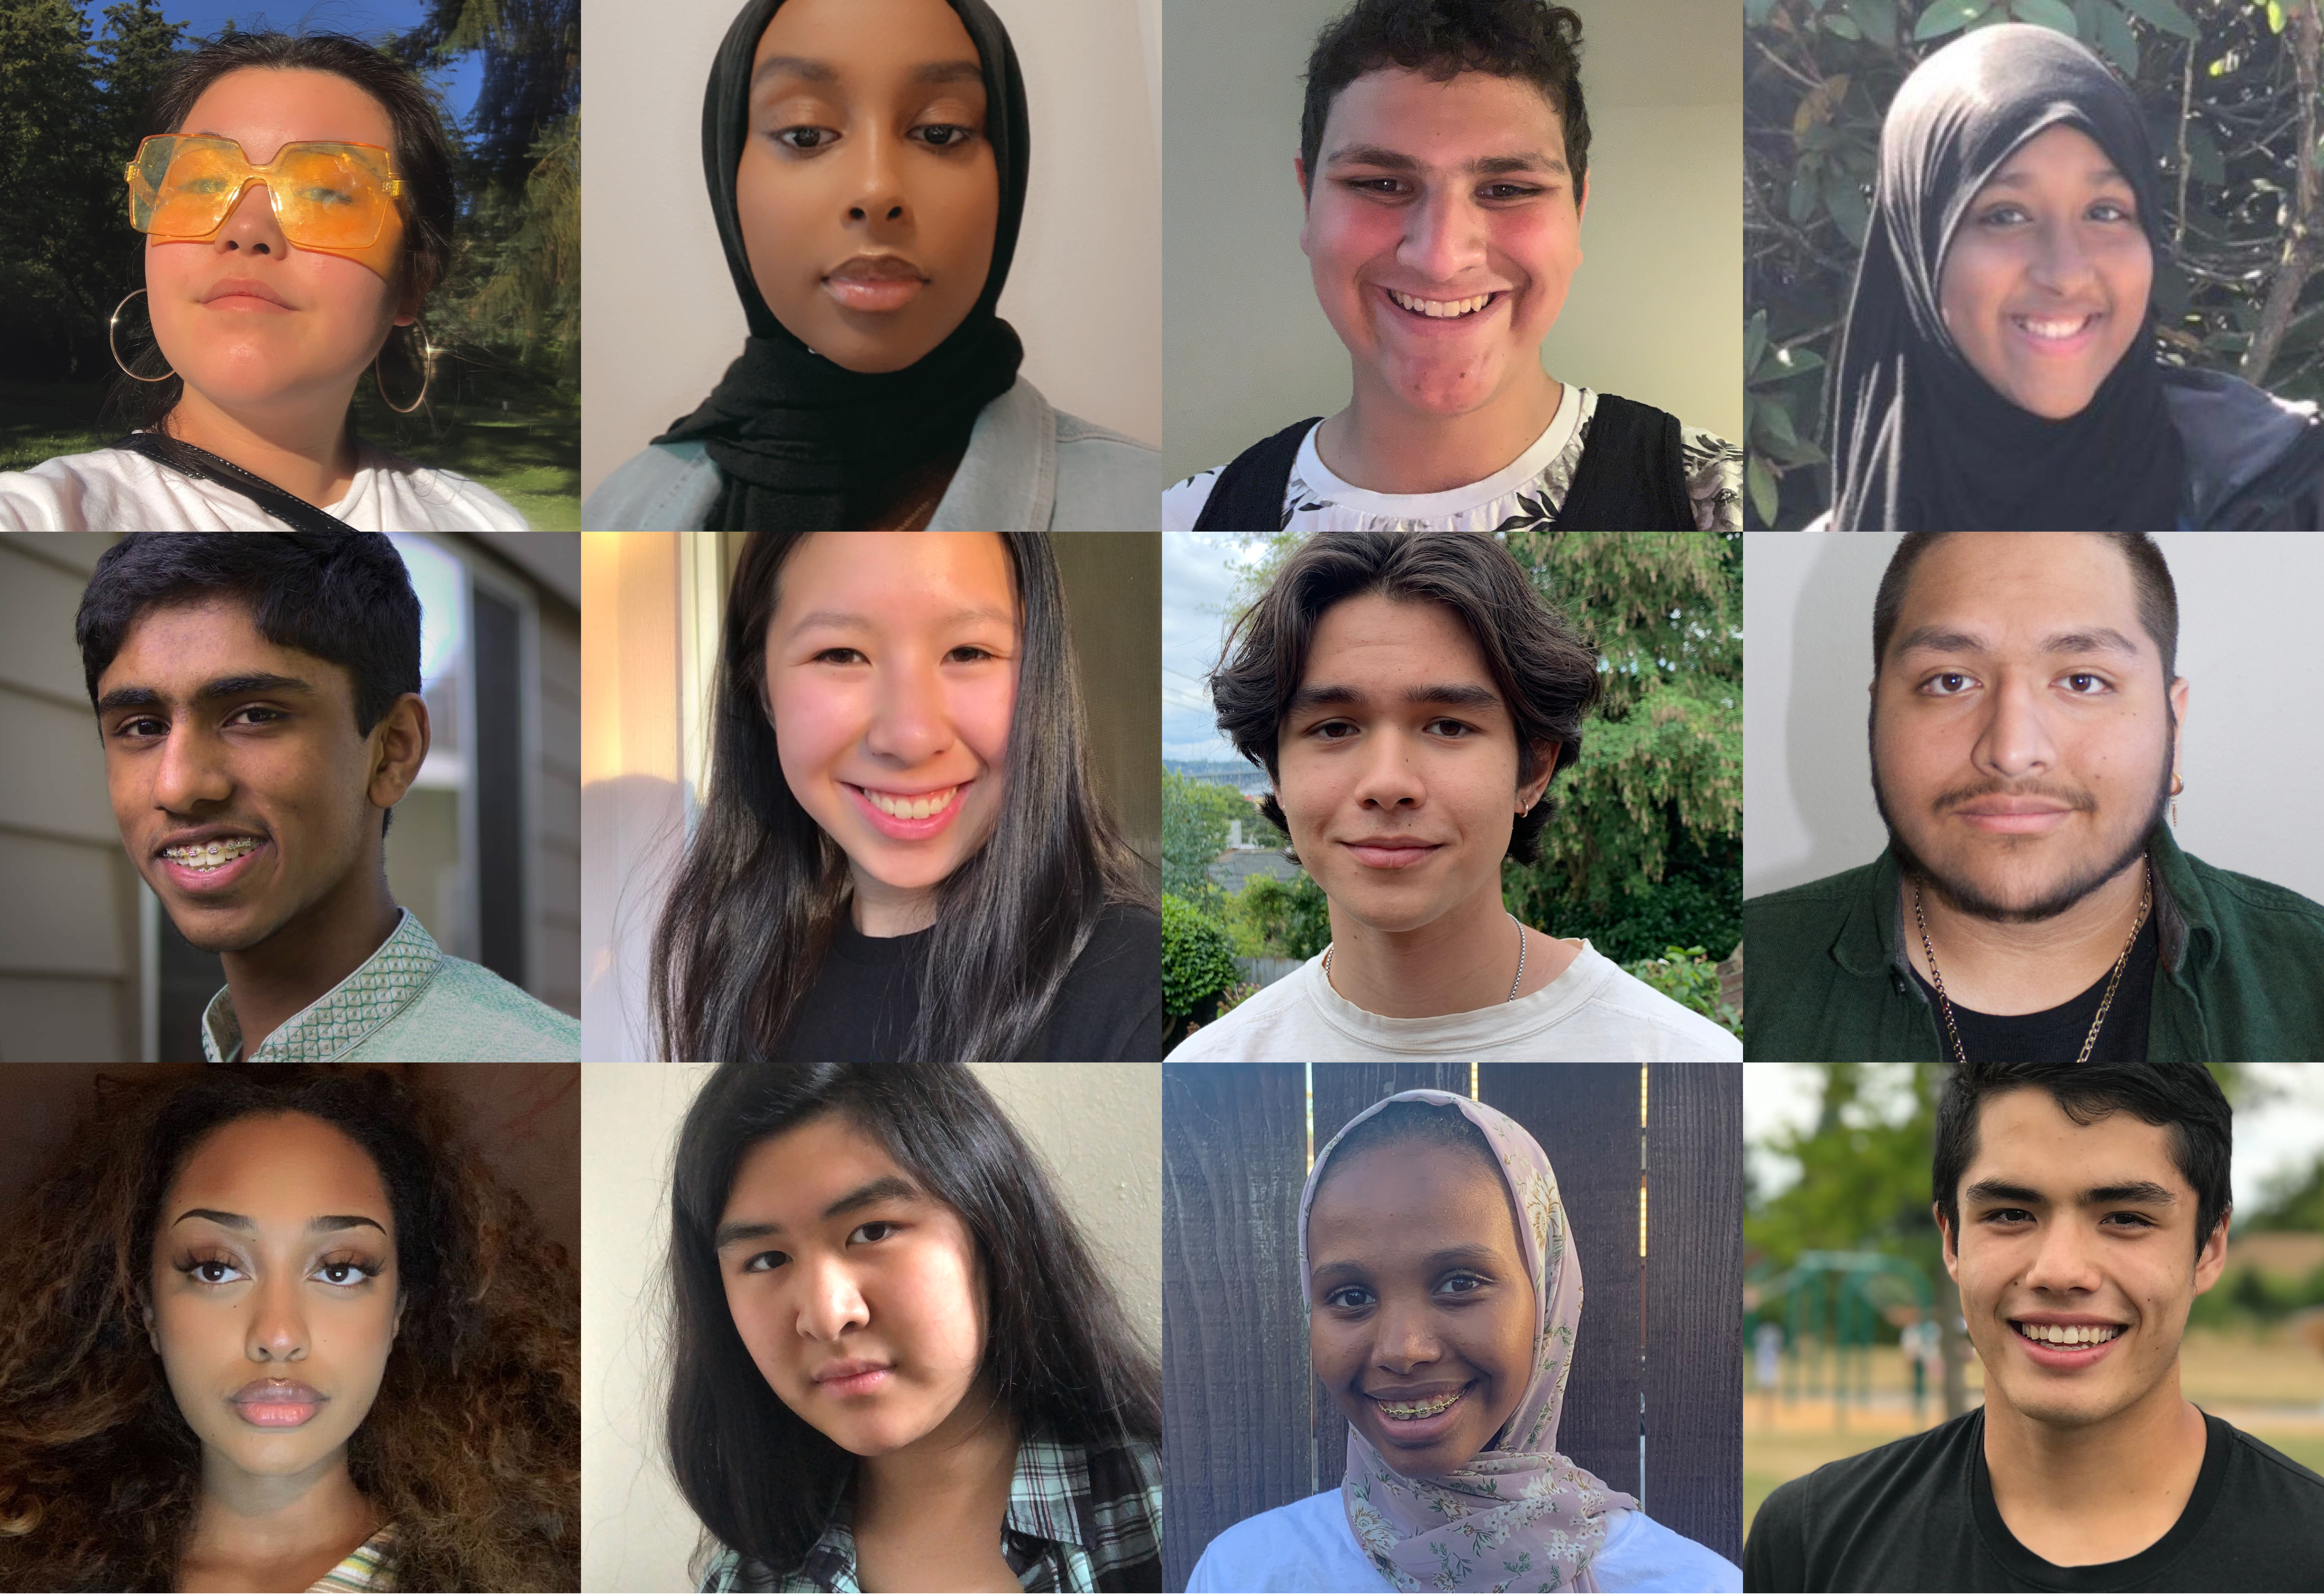 KUOW - Meet KUOW's Summer 2020 RadioActive youth producers